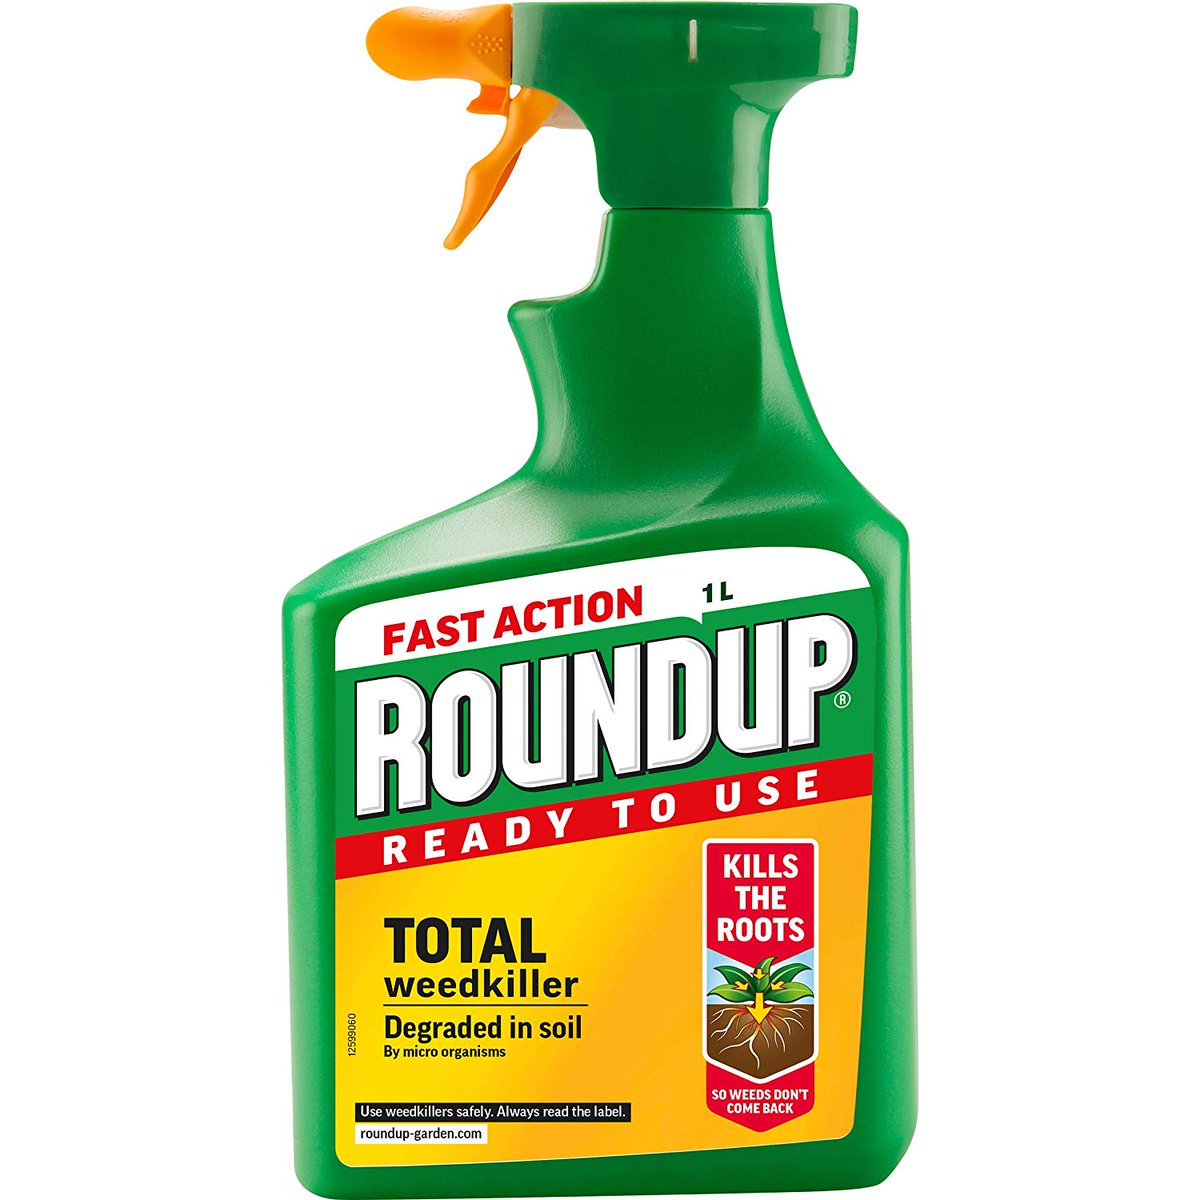 We tested consumer products, products I bought at supermarkets intended for garden use, as well as a widely used agricultural product; Roundup ProActive. 3/17